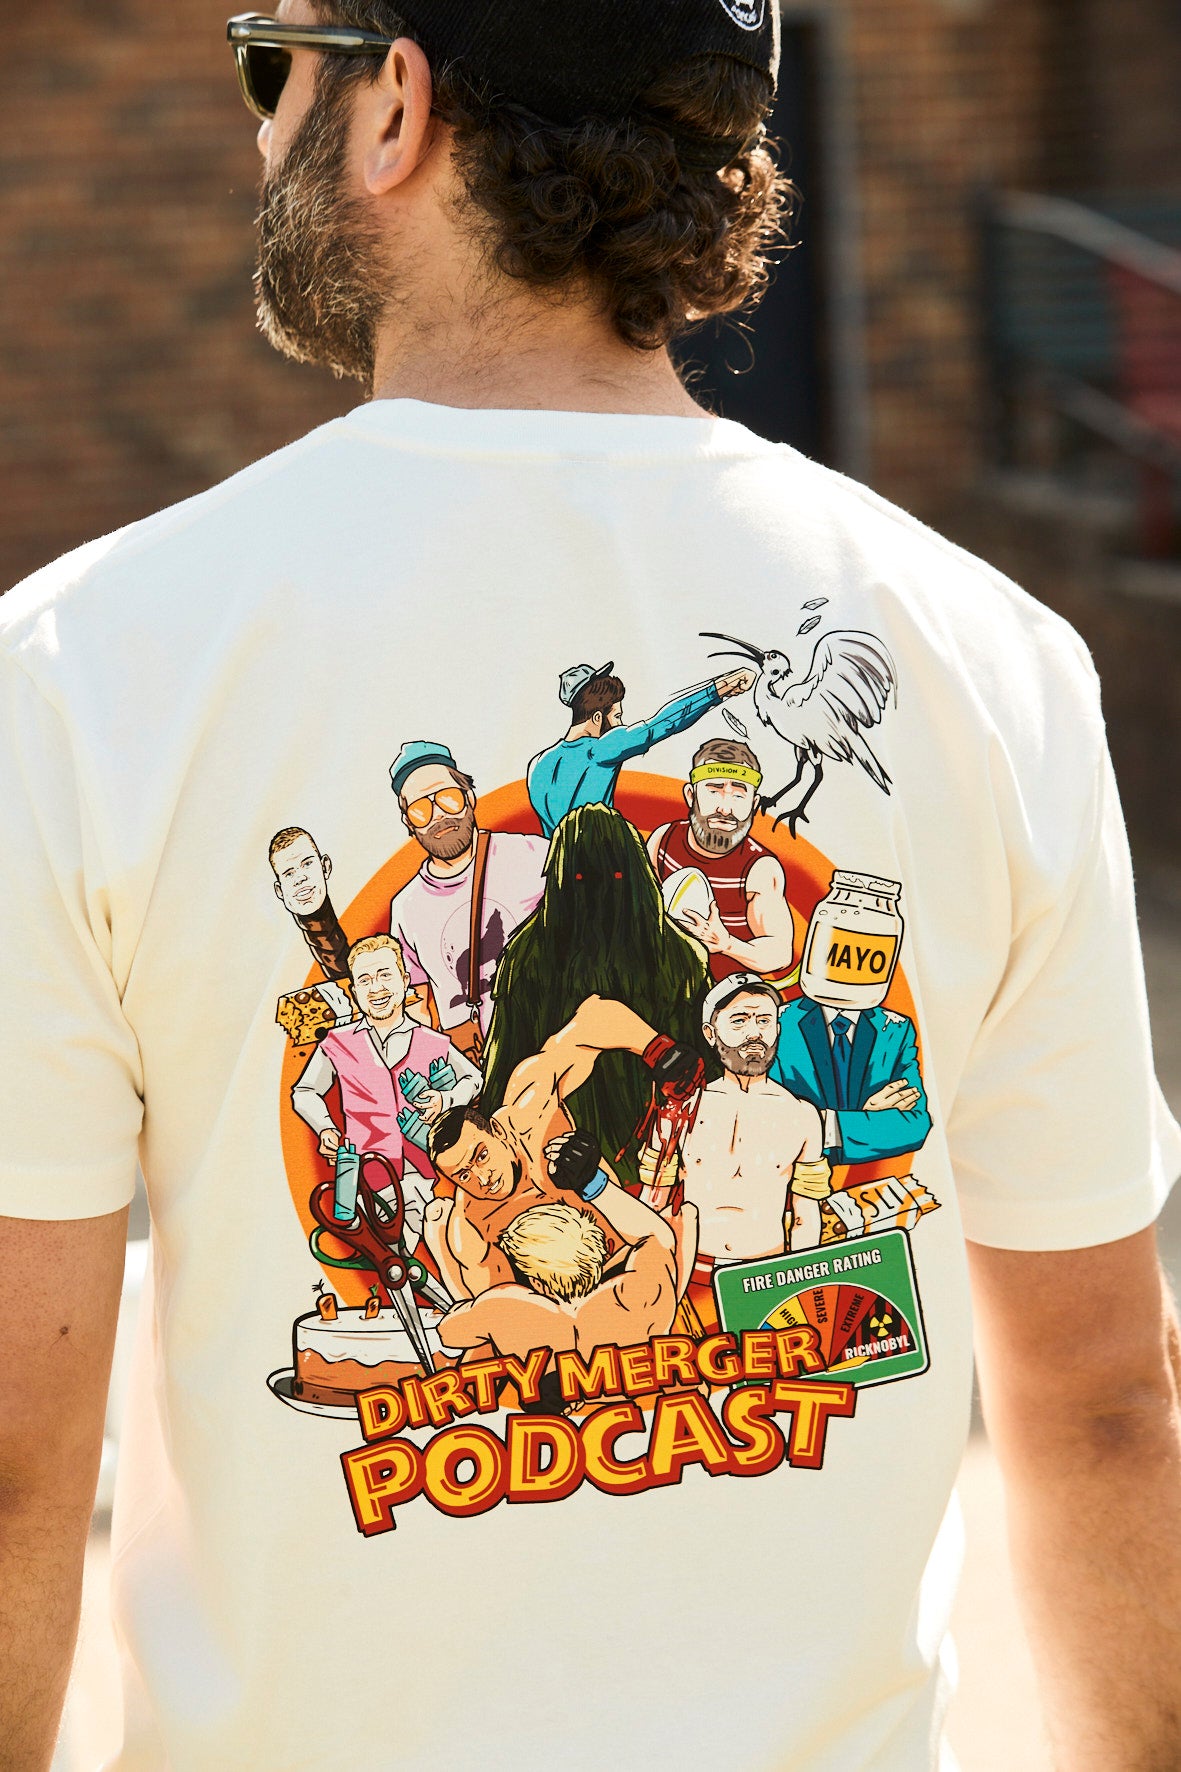 dirty merger podcast tshirt